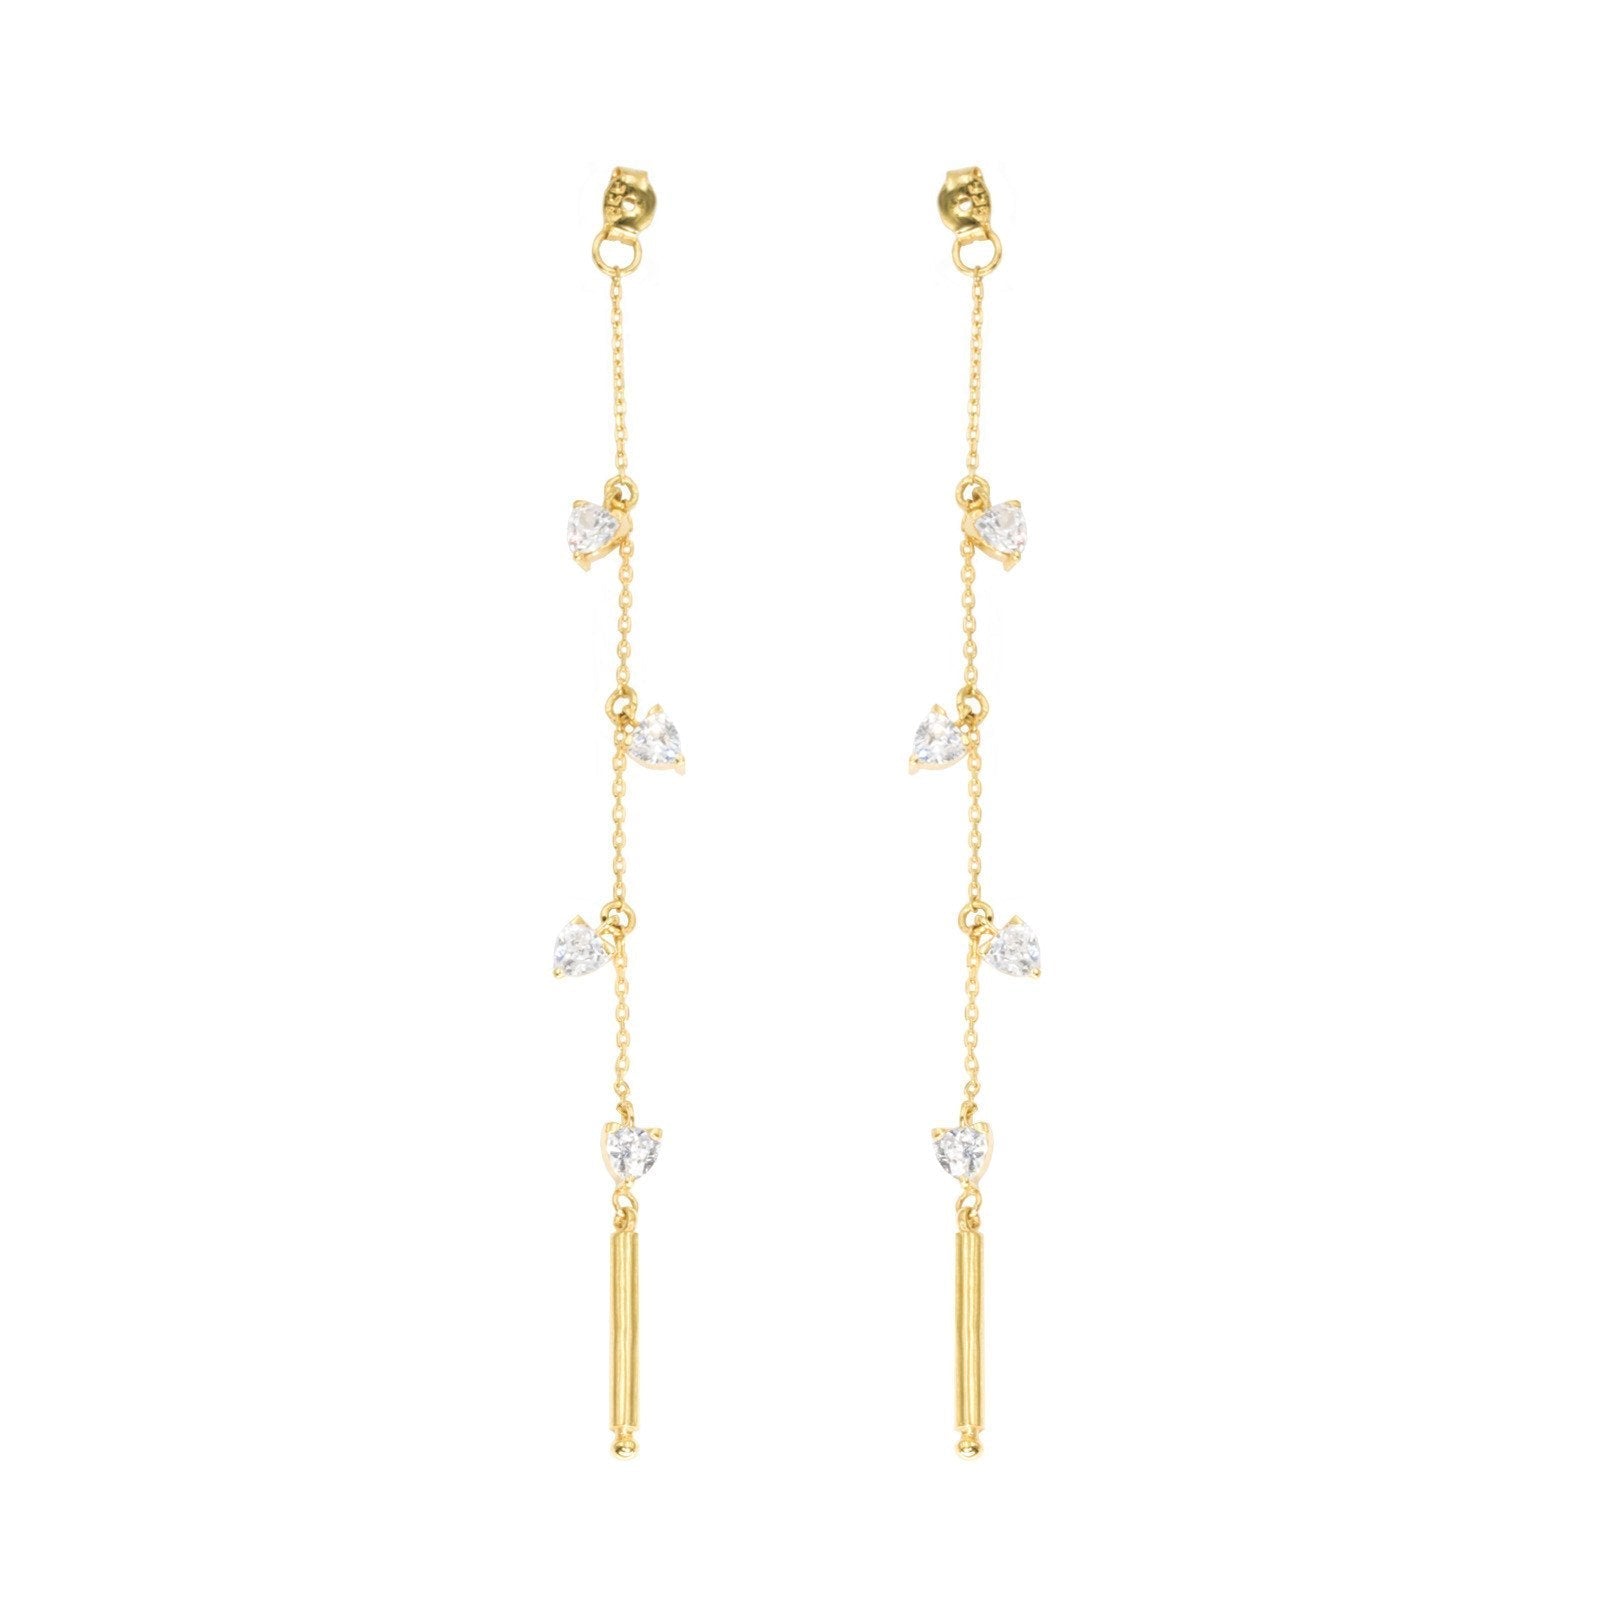 Theia - Vermeil & Sterling Linear Earring "Backs" - Camille Jewelry